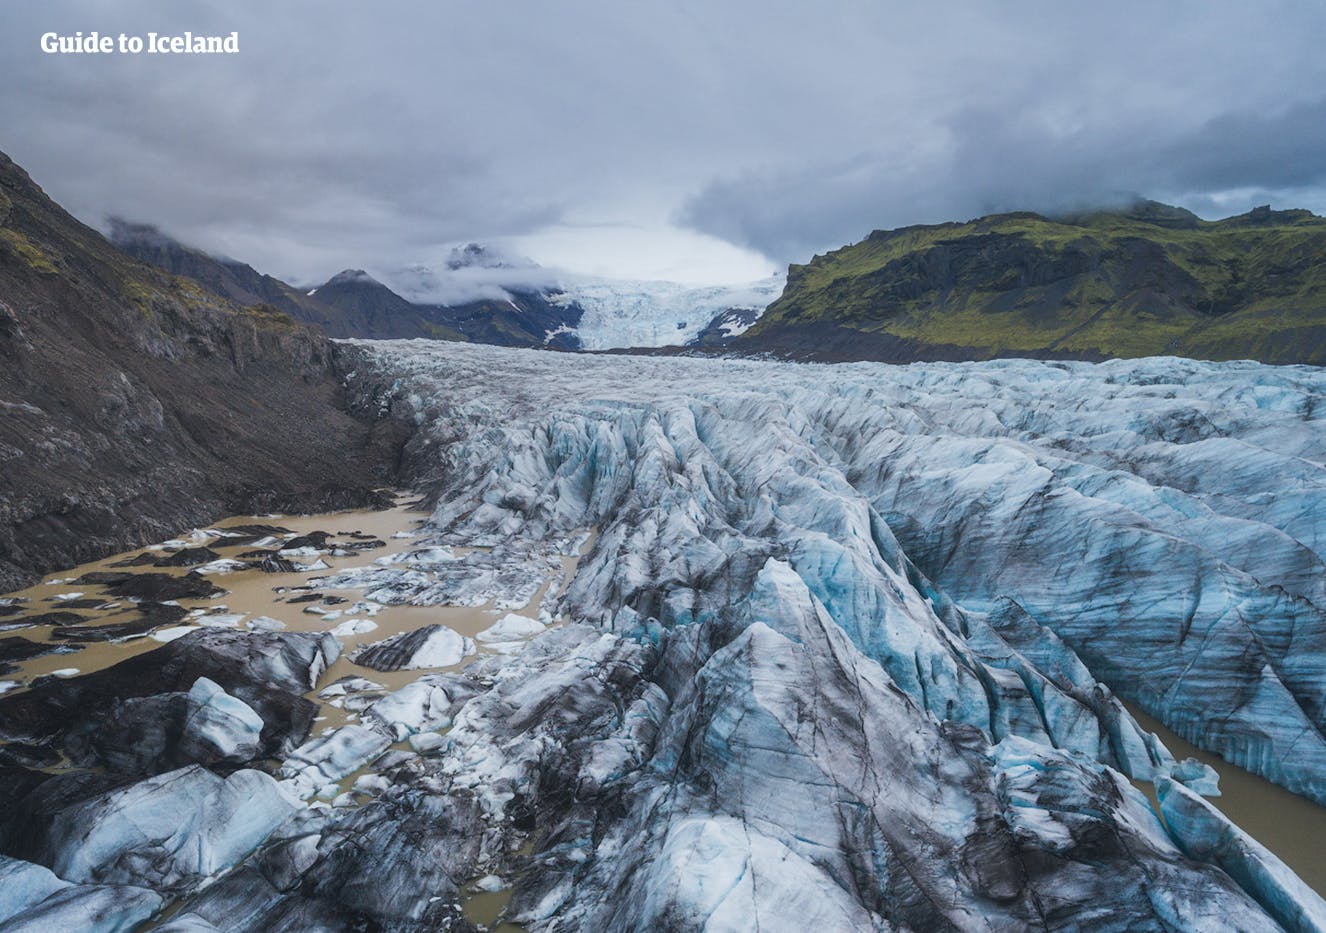 The glacier at Skaftafell was used for scenes beyond the Wall in Game of Thrones.